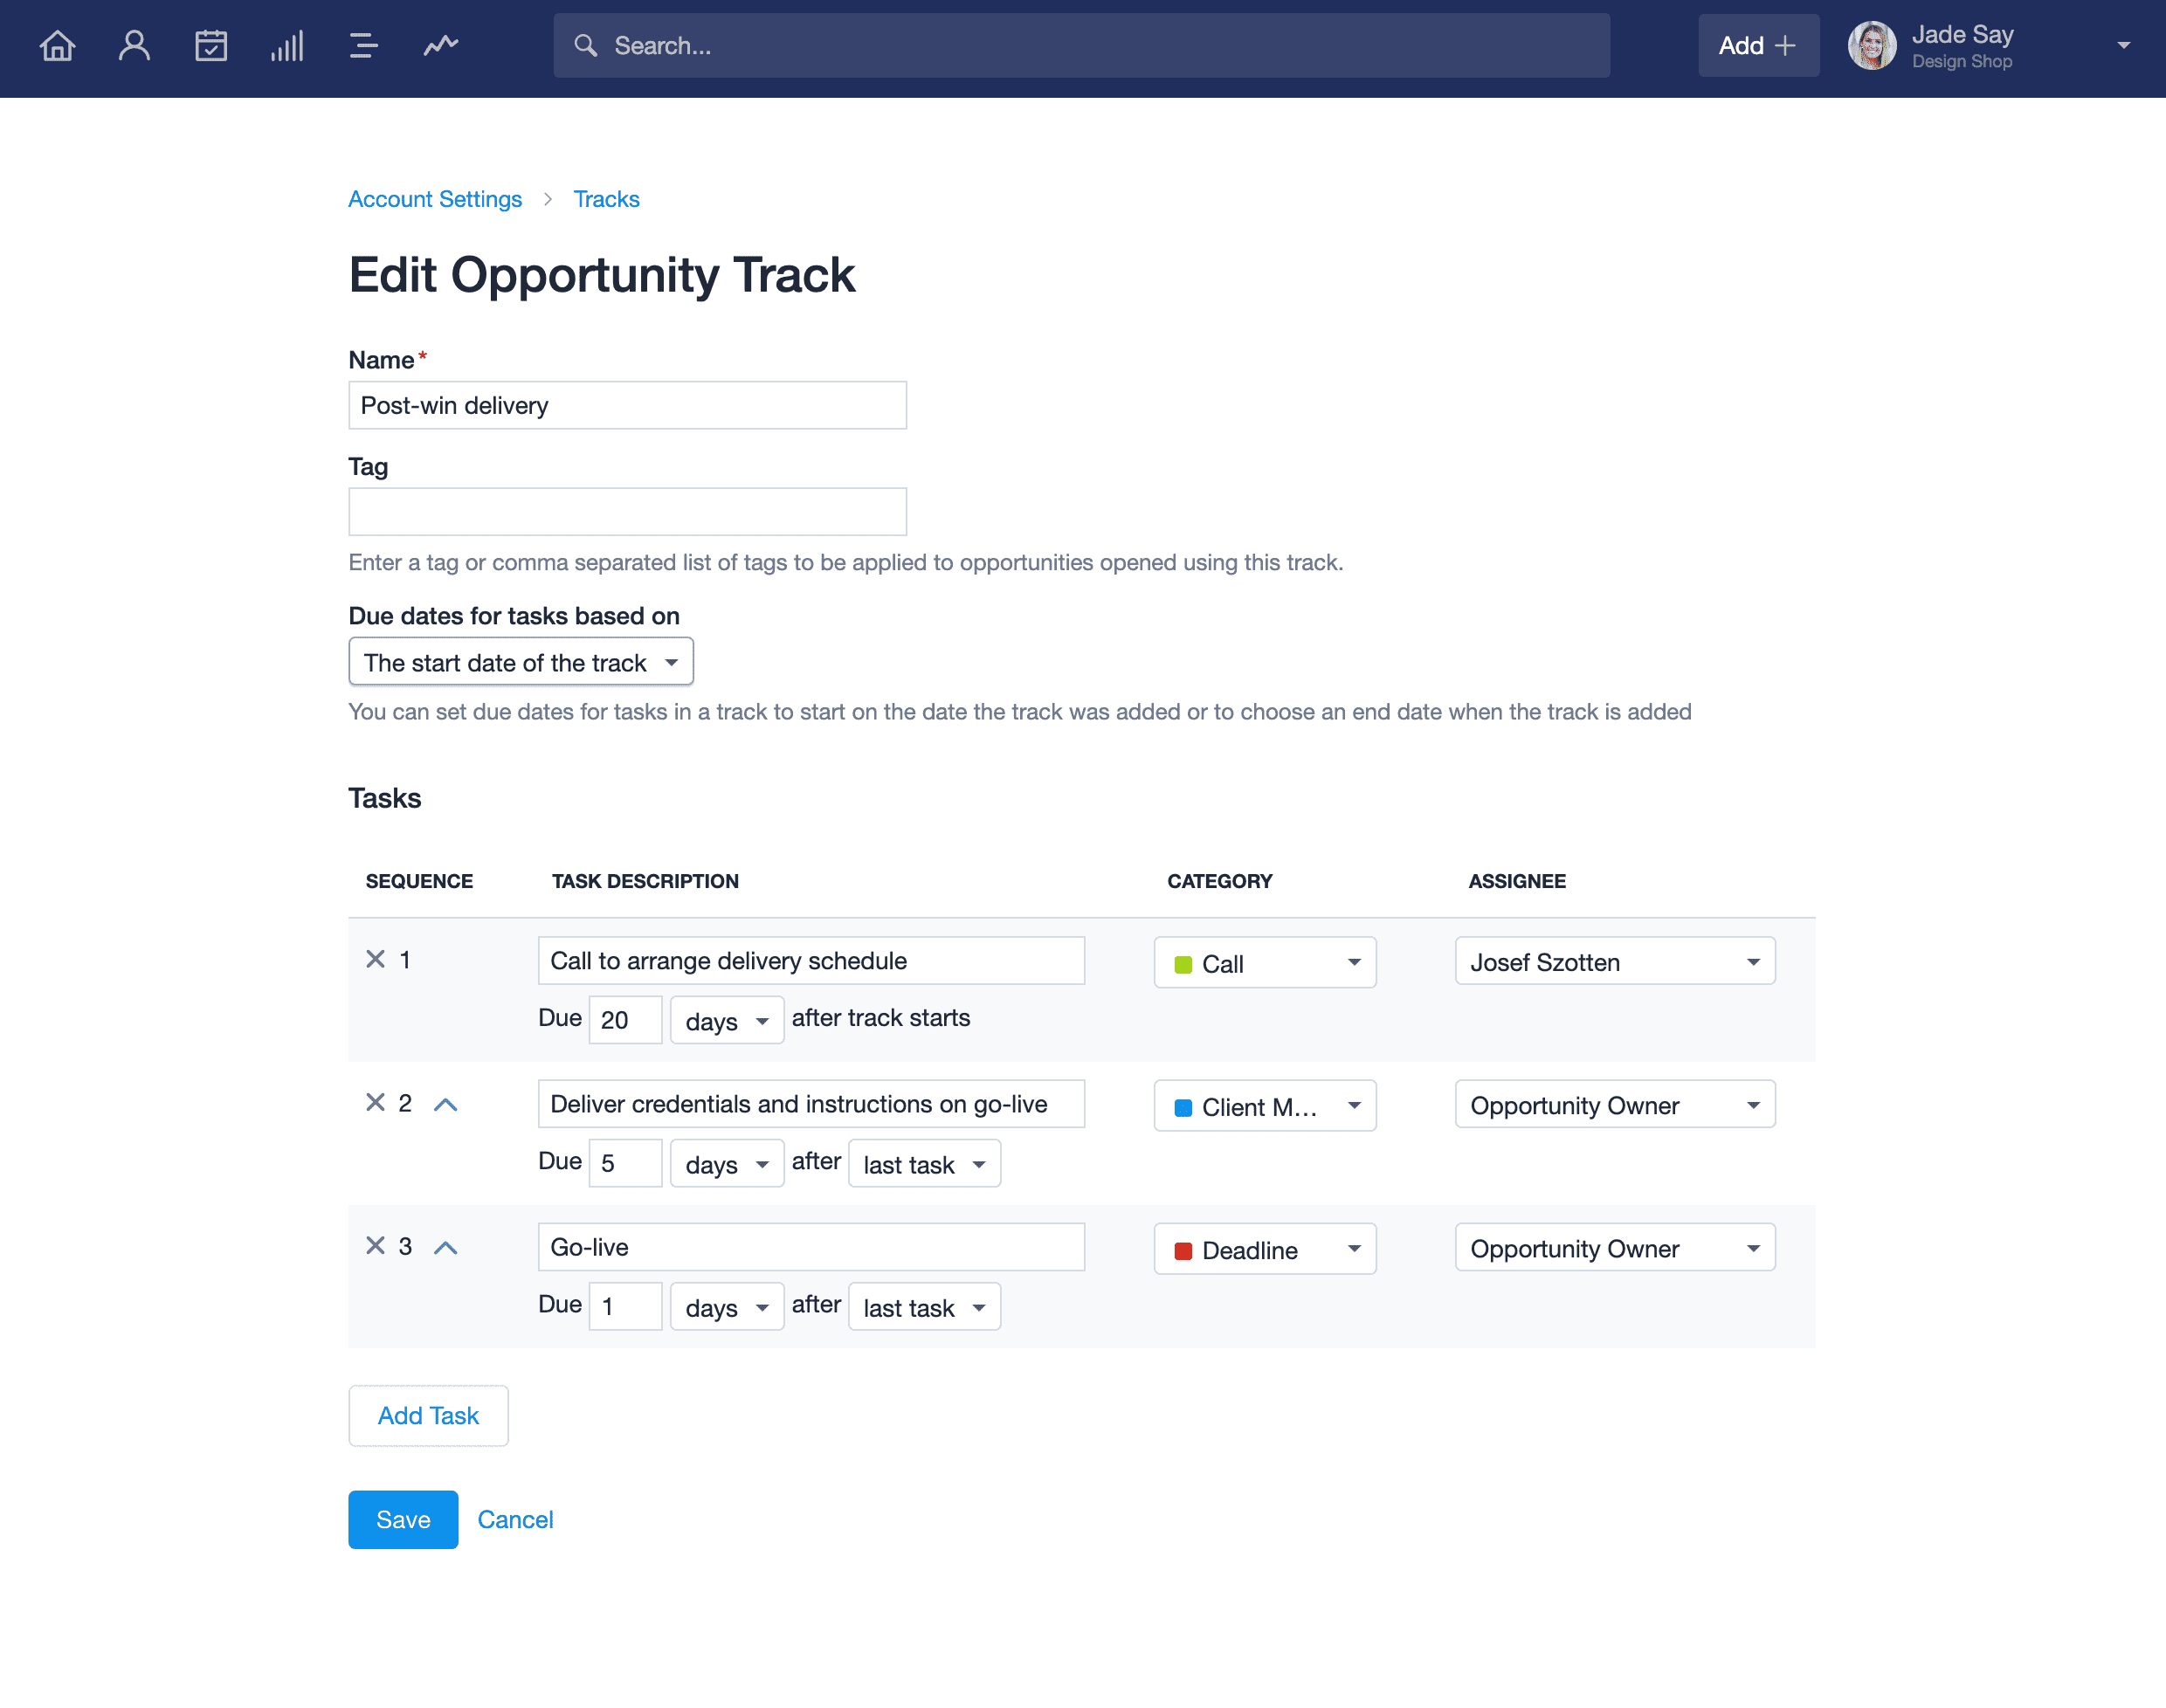 Options to edit opportunity track